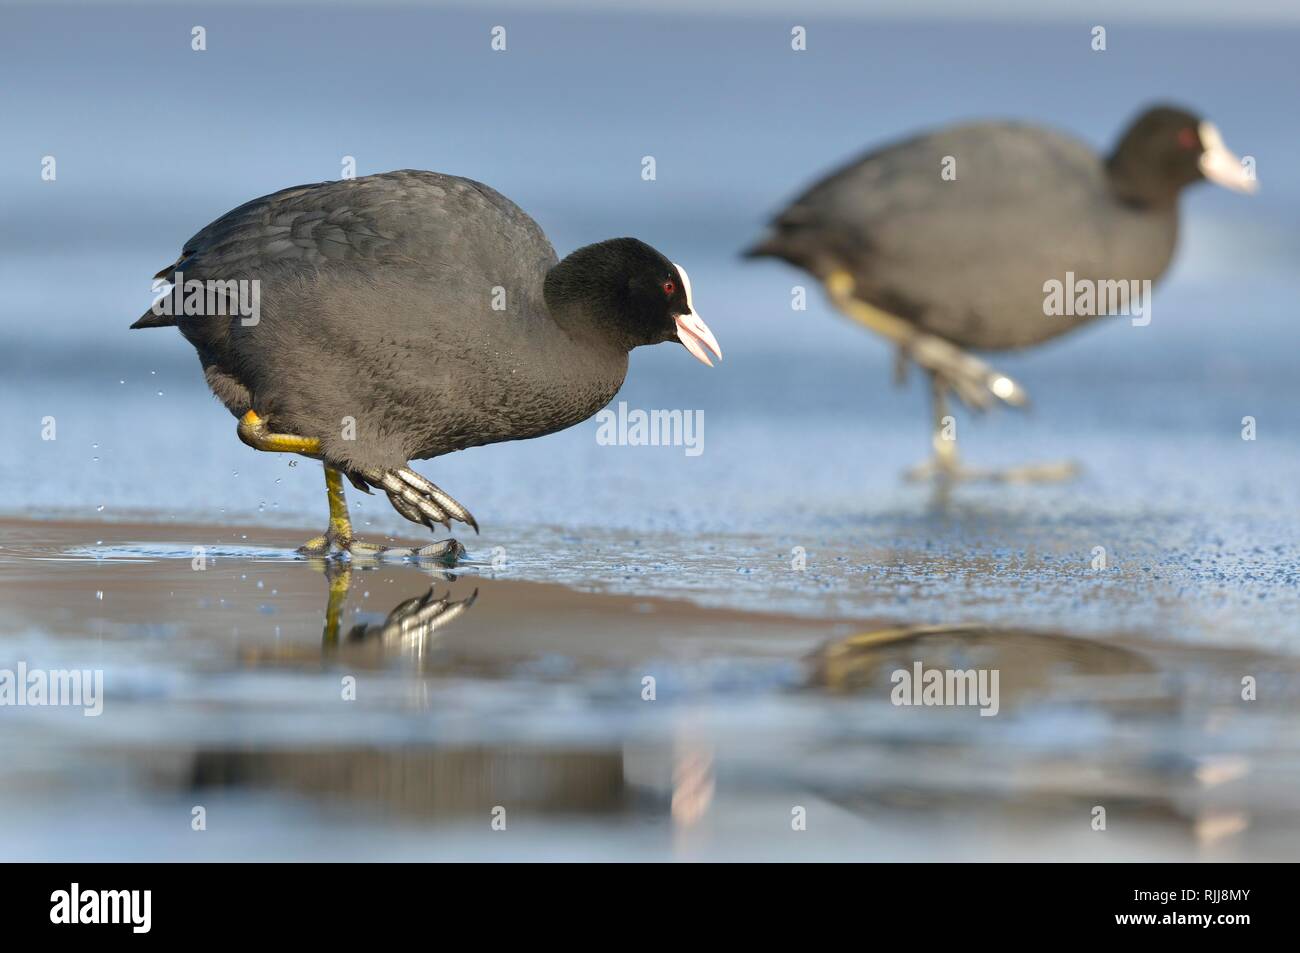 Common coots (Fulica atra), adults standing on ice on frozen lake, Saxony, Germany Stock Photo